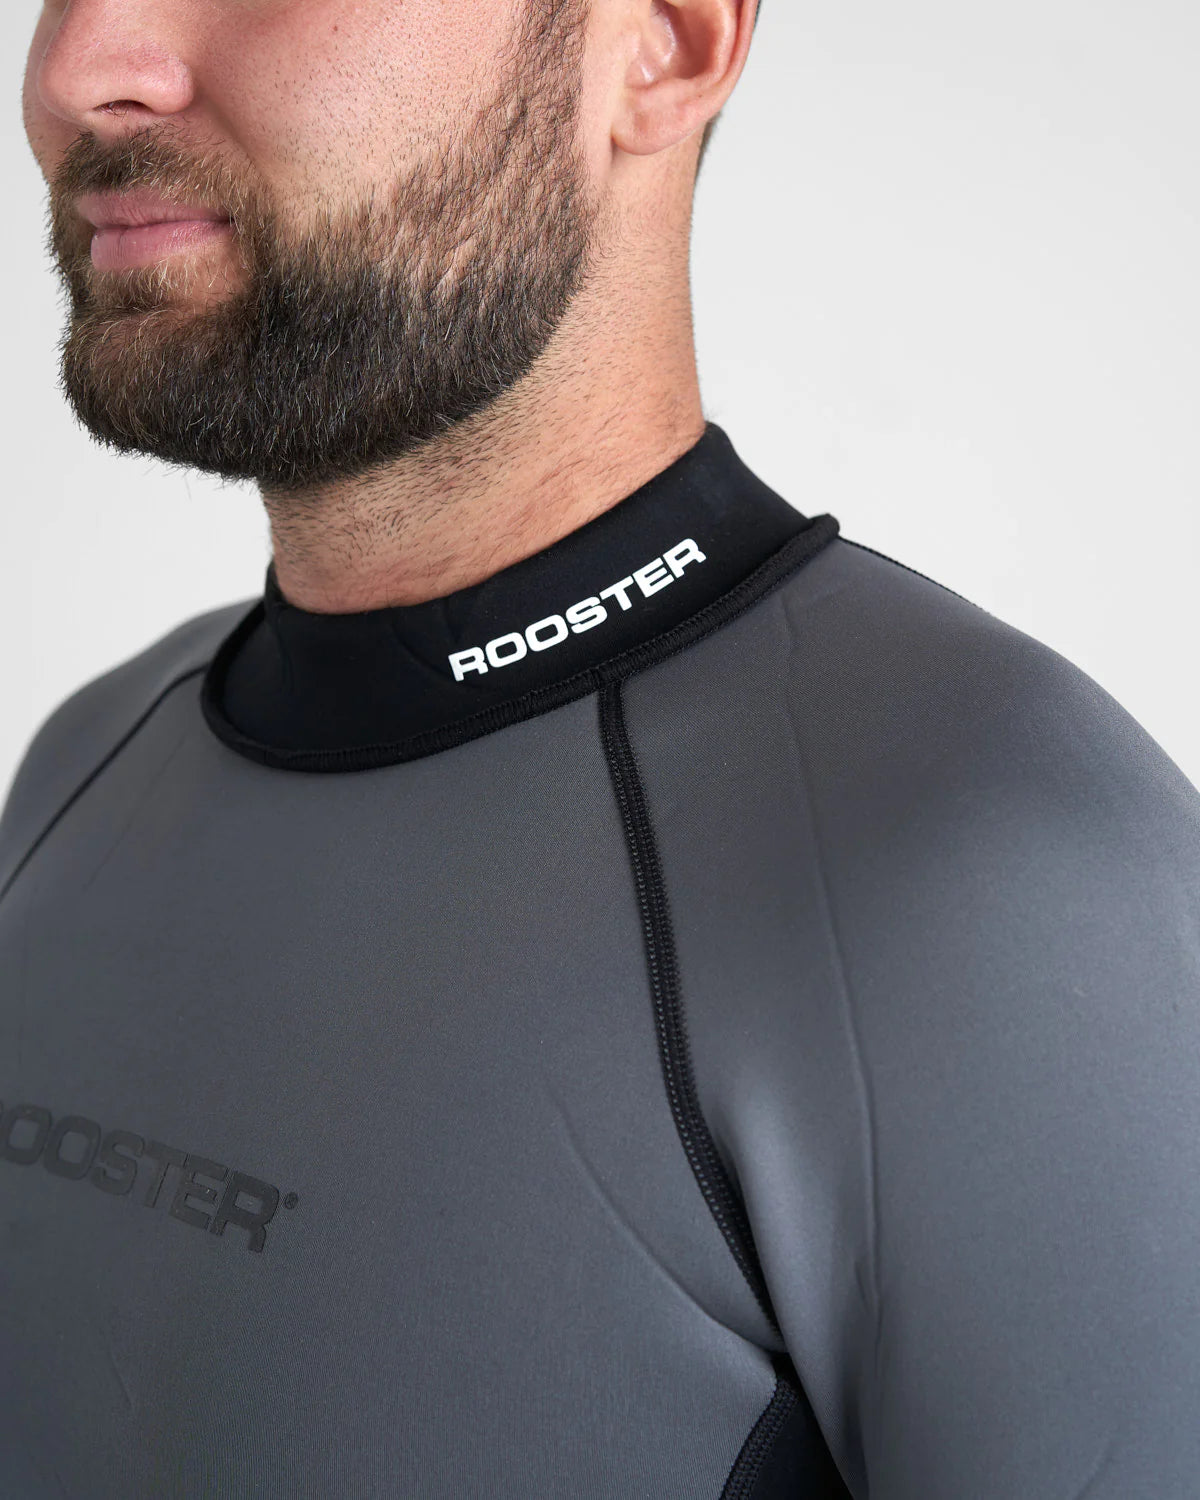 Rooster Thermaflex 1.5mm Top Unisex